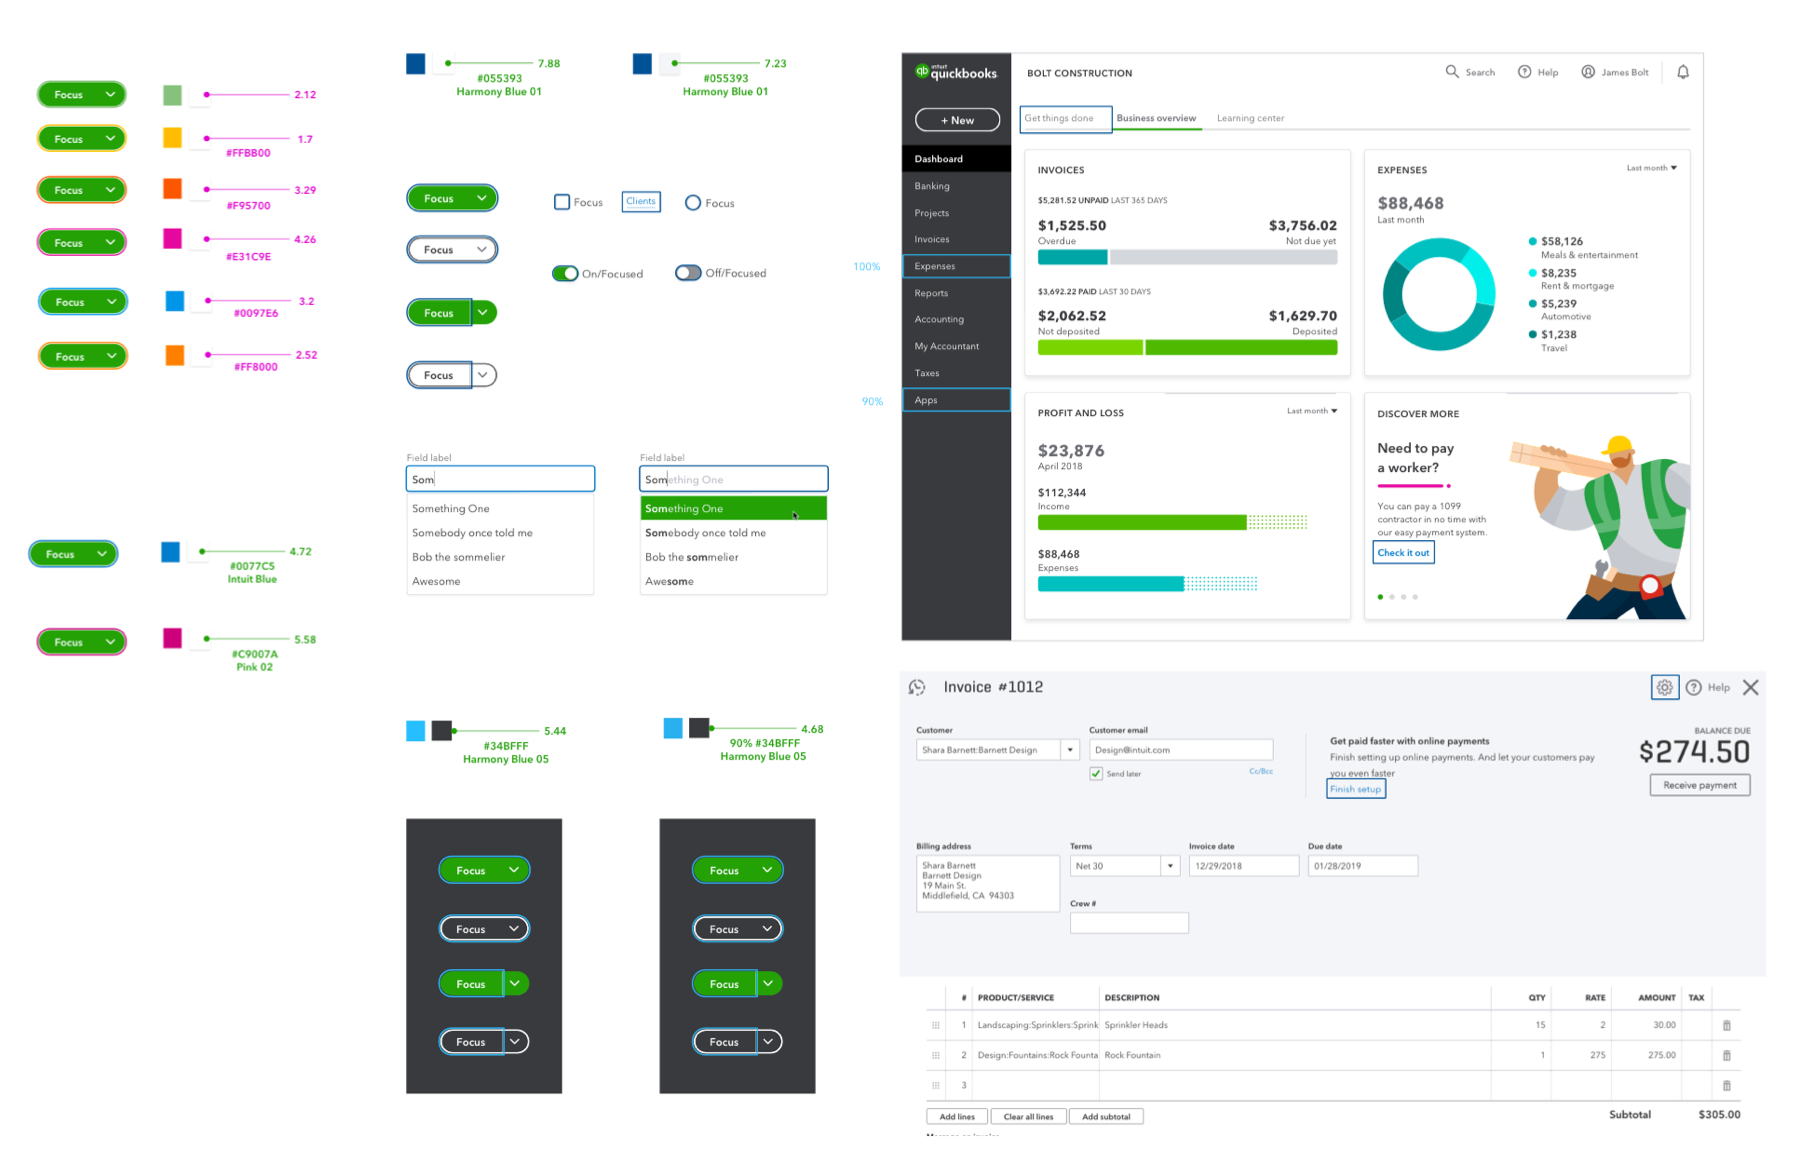 Visual exploration of placing the visual indicator on buttons and QuickBooks page